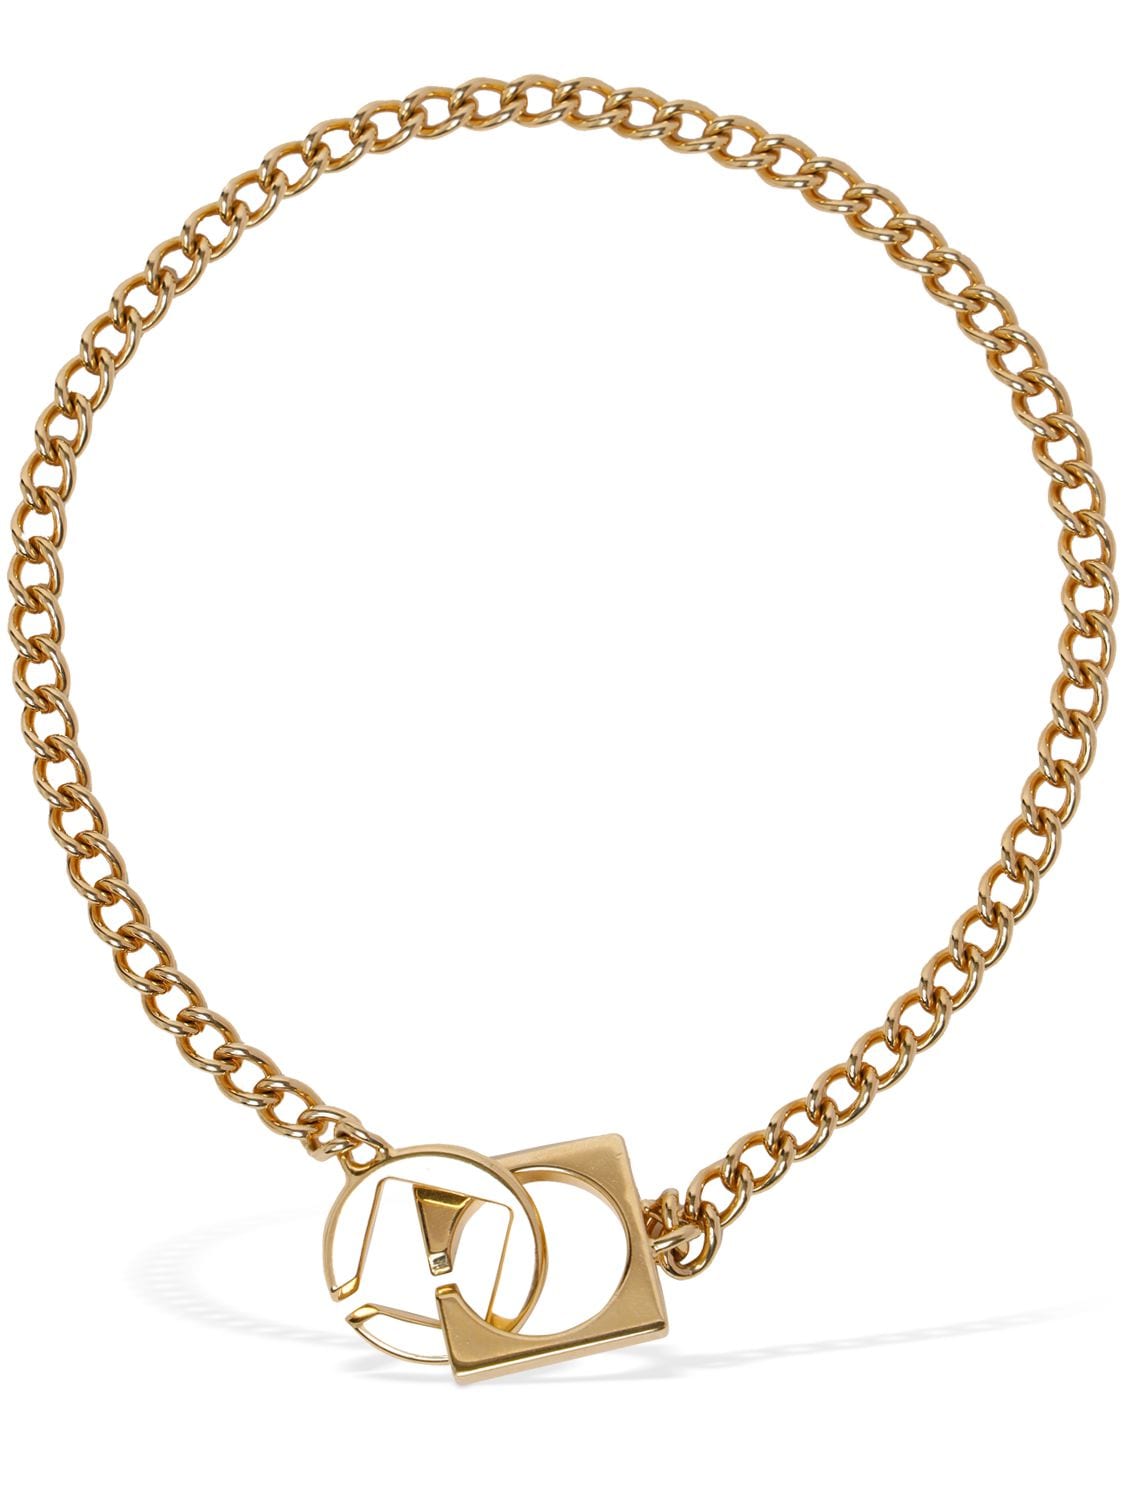 Image of Le Collier Rond Carre Collar Necklace